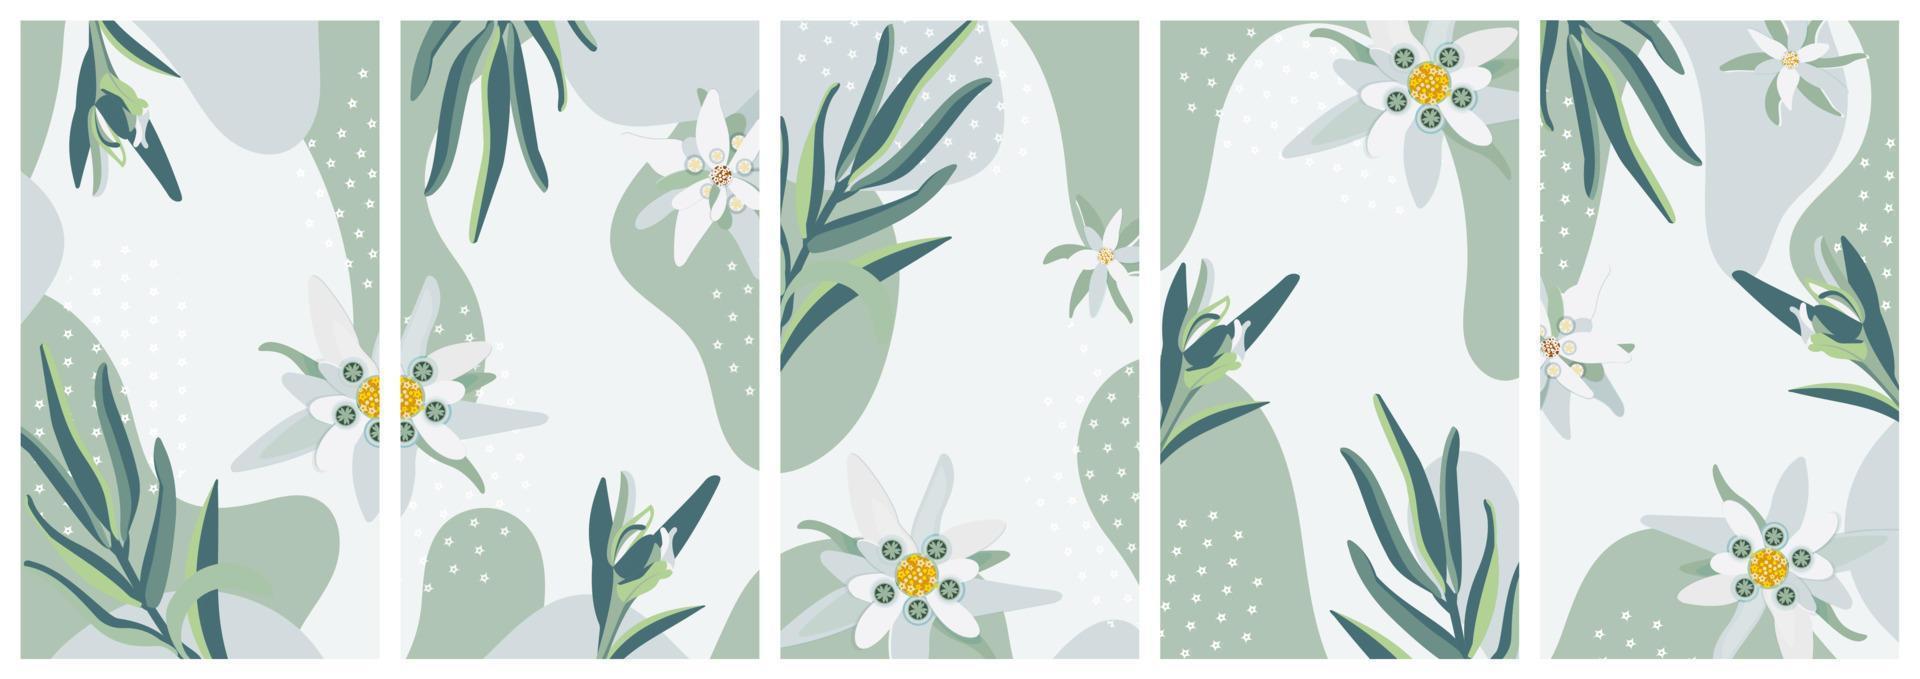 Edelweiss. Set of vector vertical isolated backgrounds  for social media stories, banner with copy space for text. Summer flower pattern. Stock vector illustration.